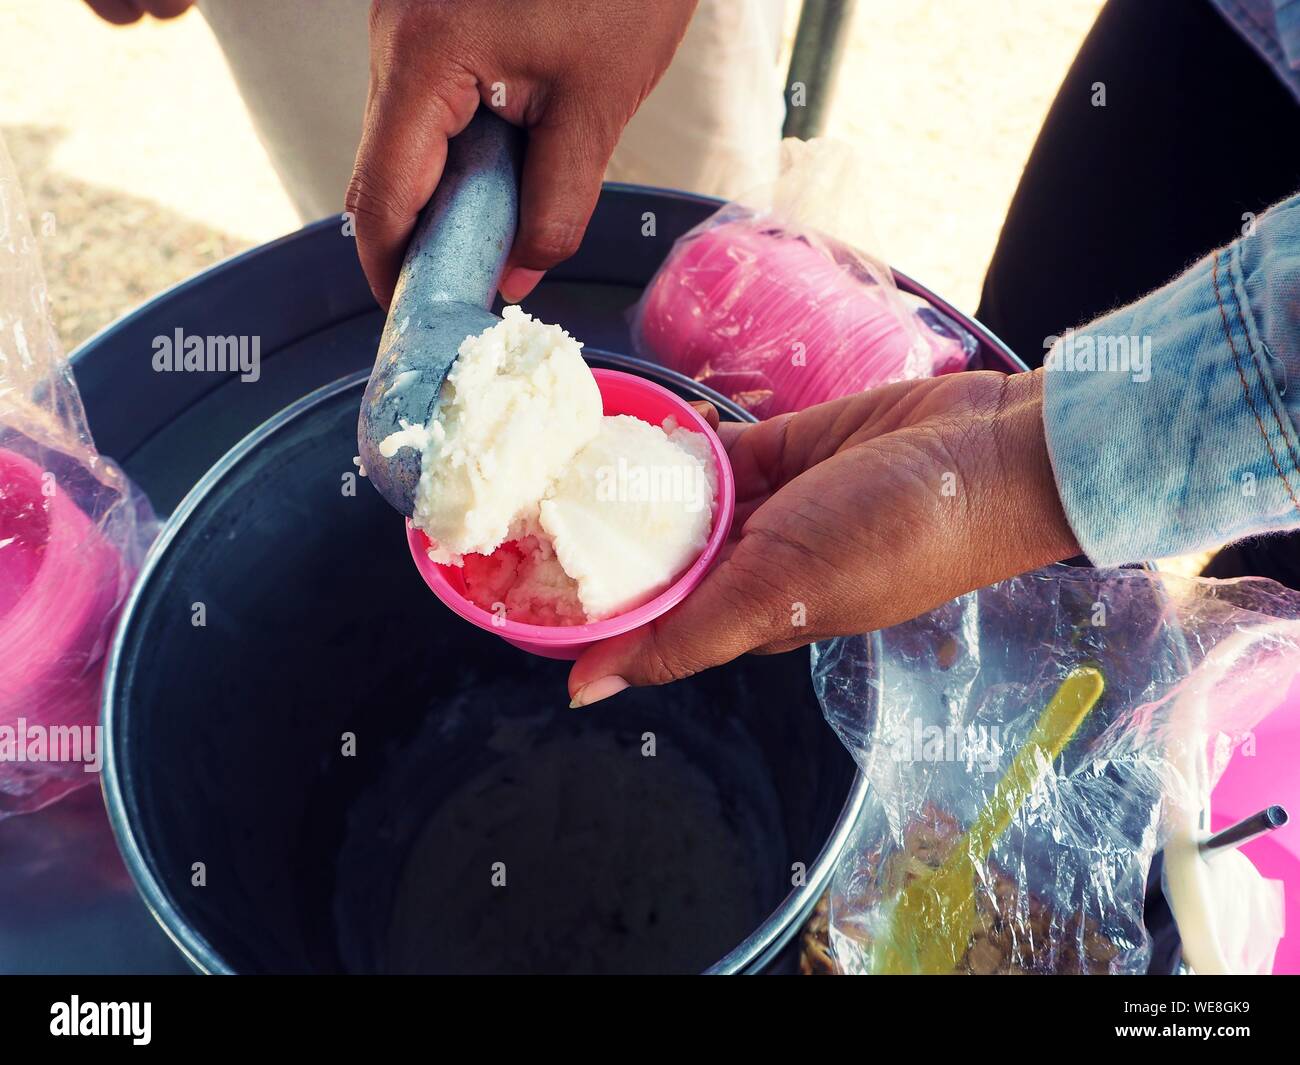 Hand holding a spoon to scoop the ice cream into the pink color cup Stock Photo